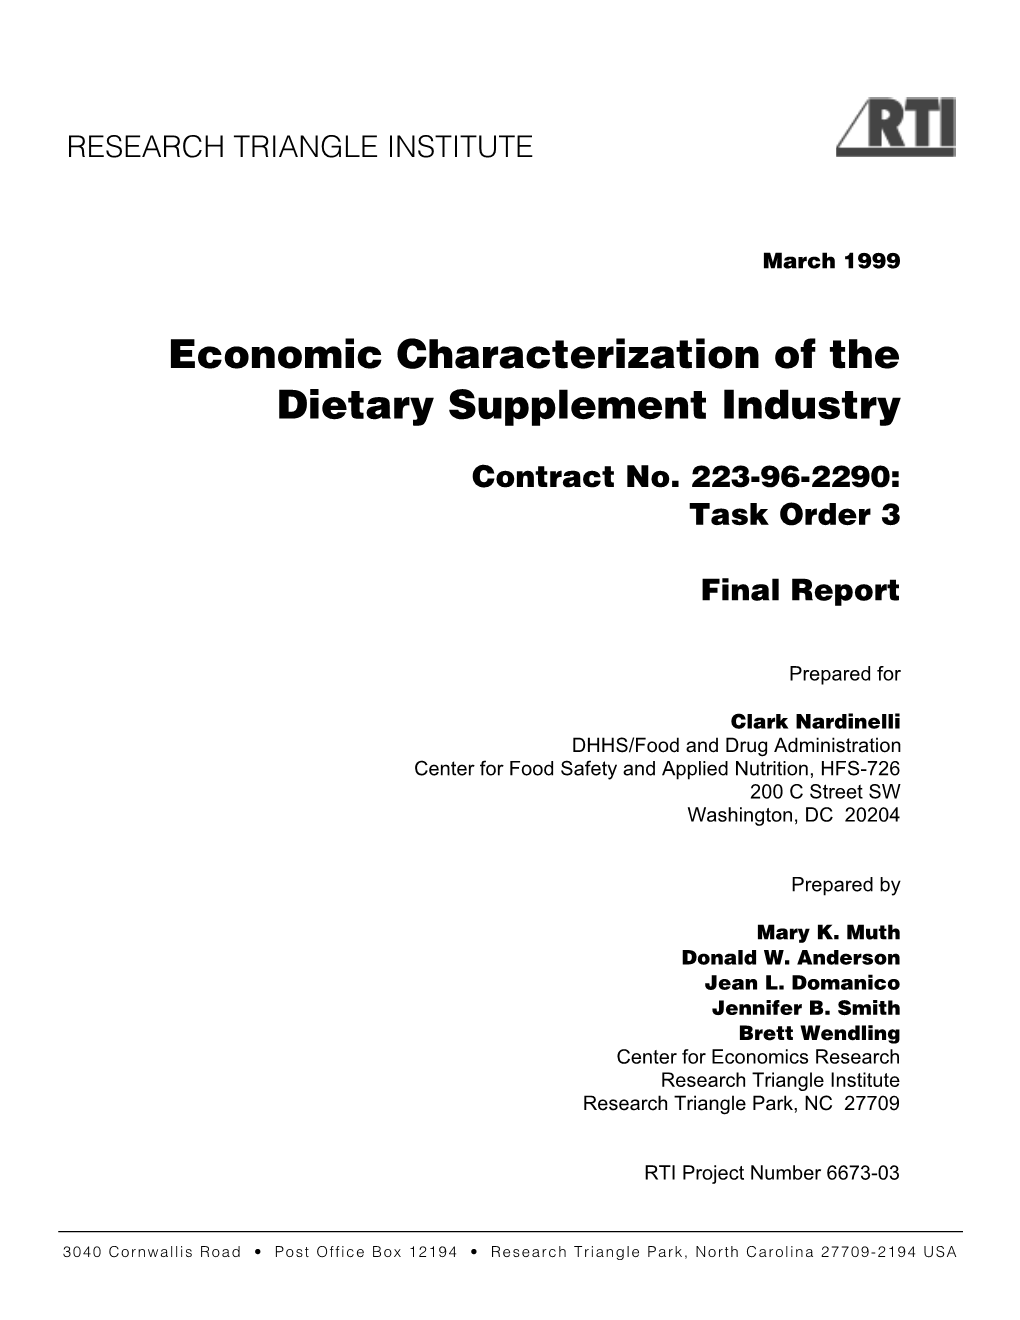 Economic Characterization of the Dietary Supplement Industry